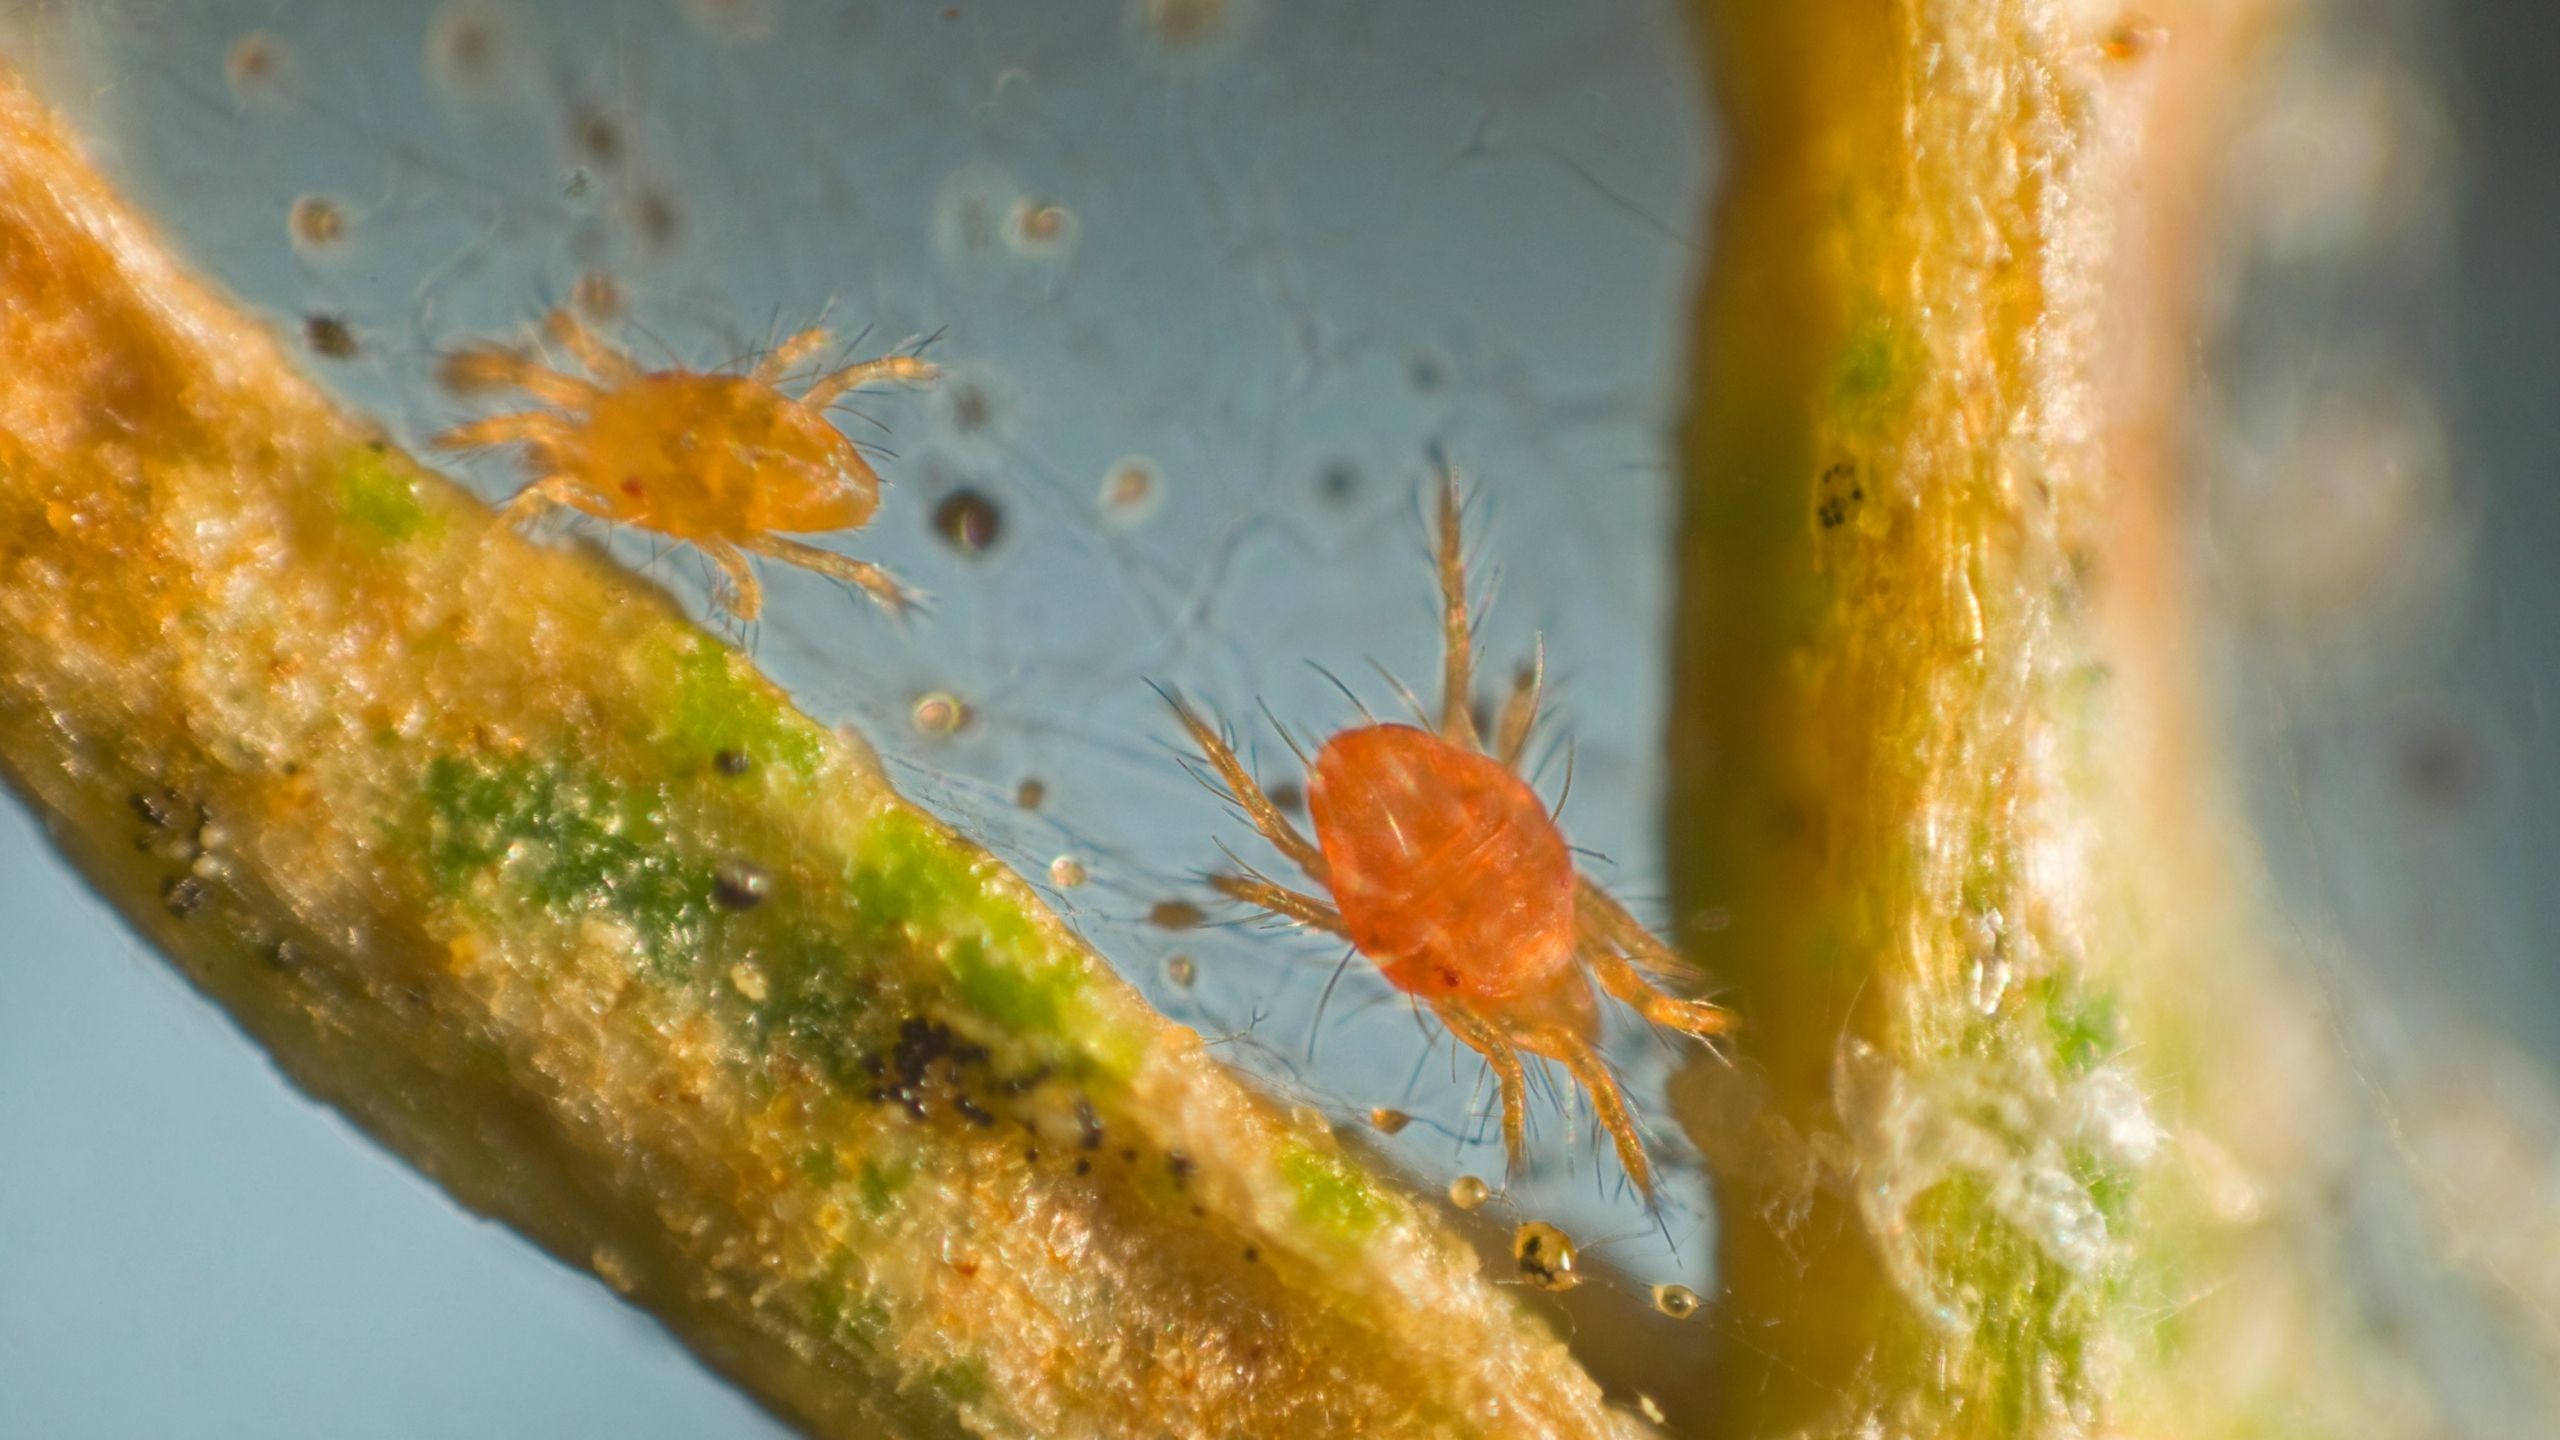 Two-spotted spider mite adult